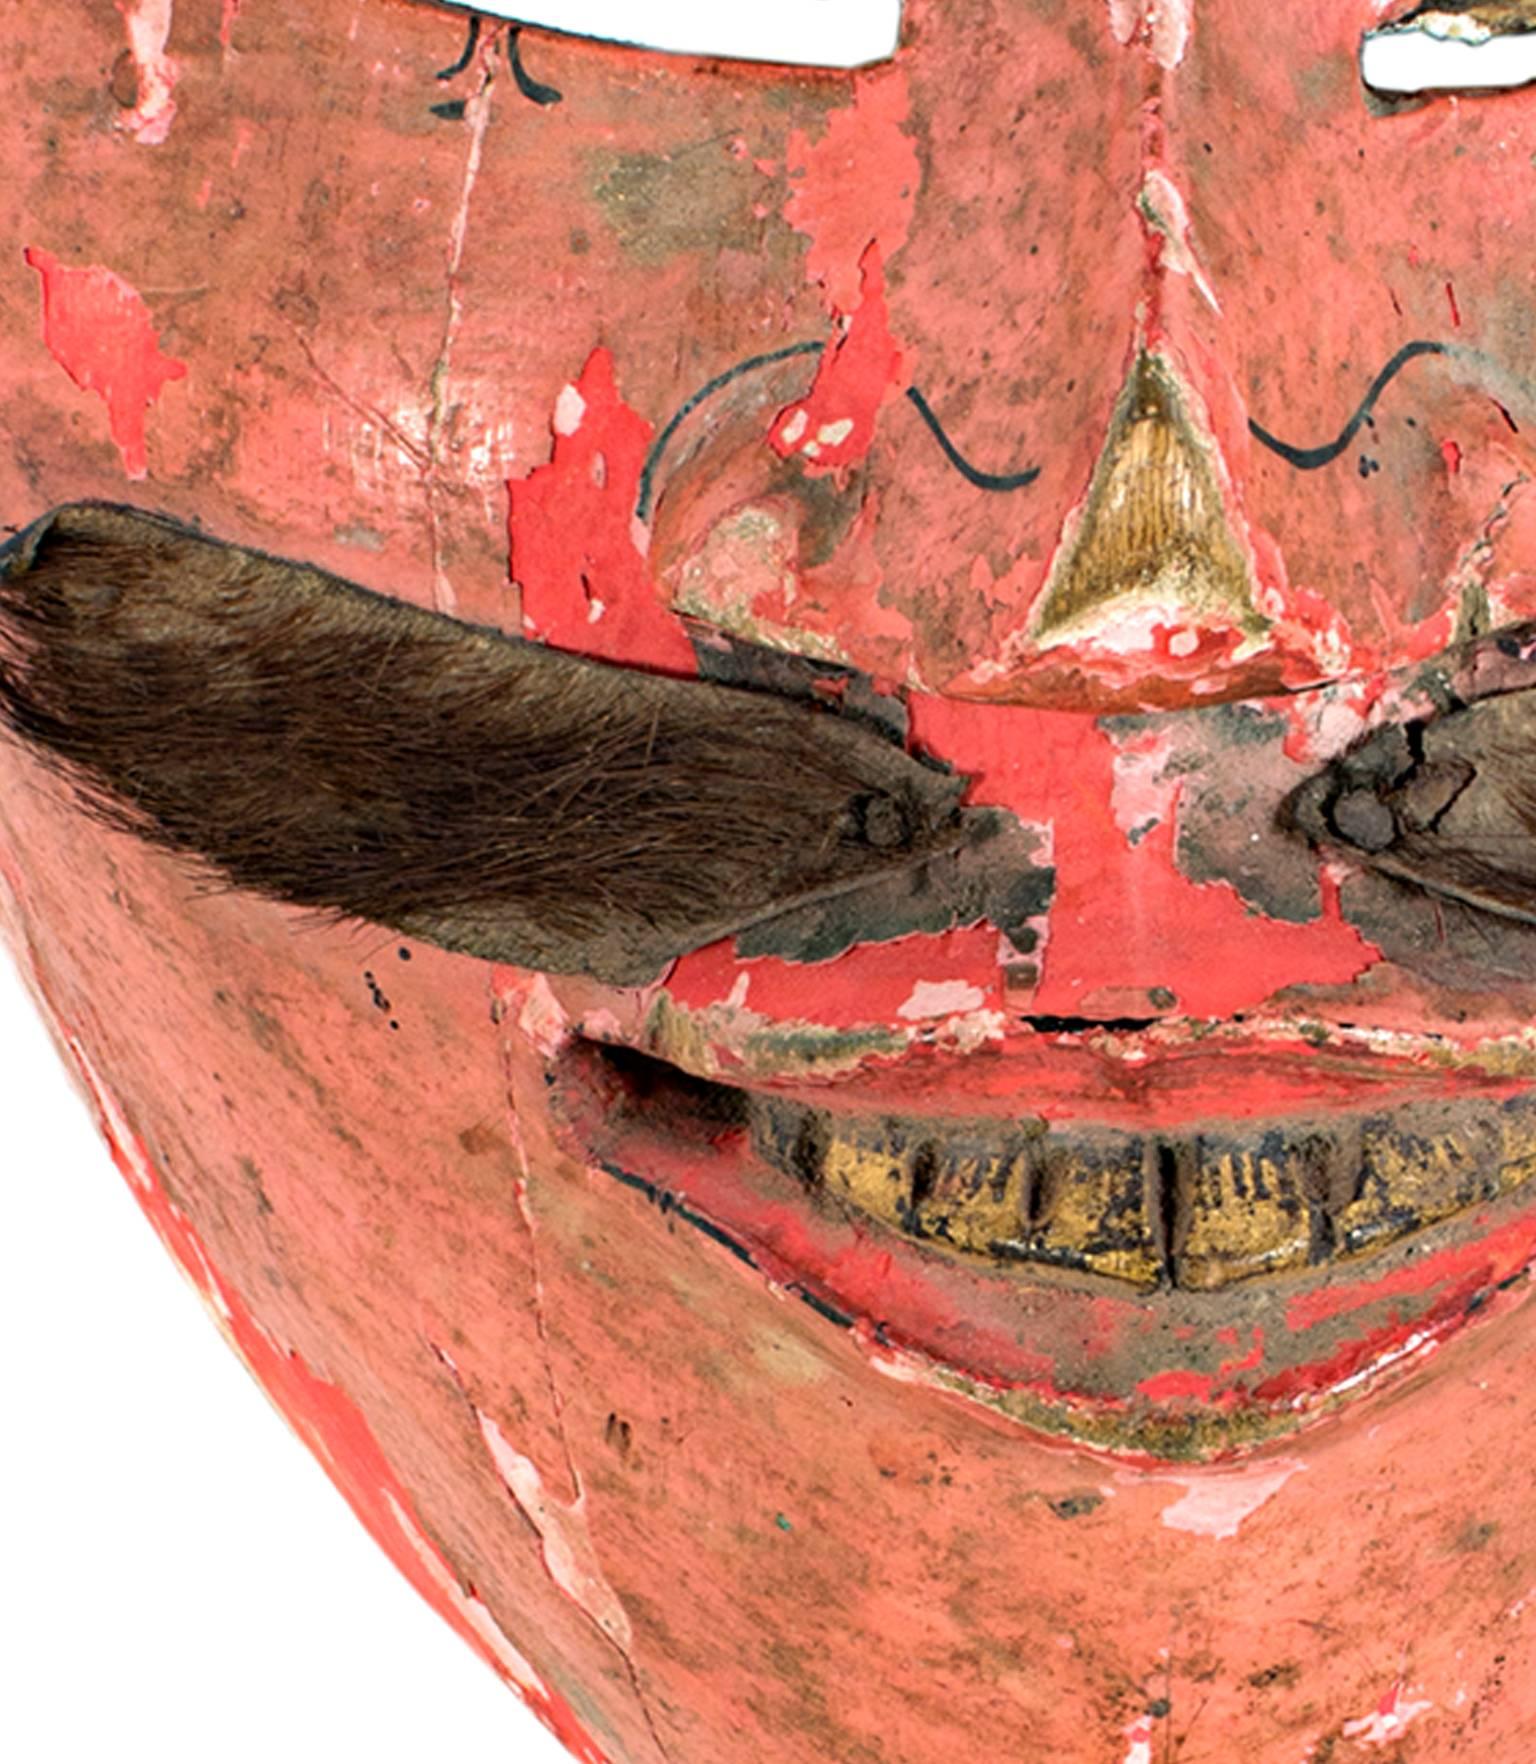 This mask, created by an unknown Indonesian artist, features a bright salmon-colored face with heavily slanted eyes. It also has a mustache made of animal fur. It is approximately 7